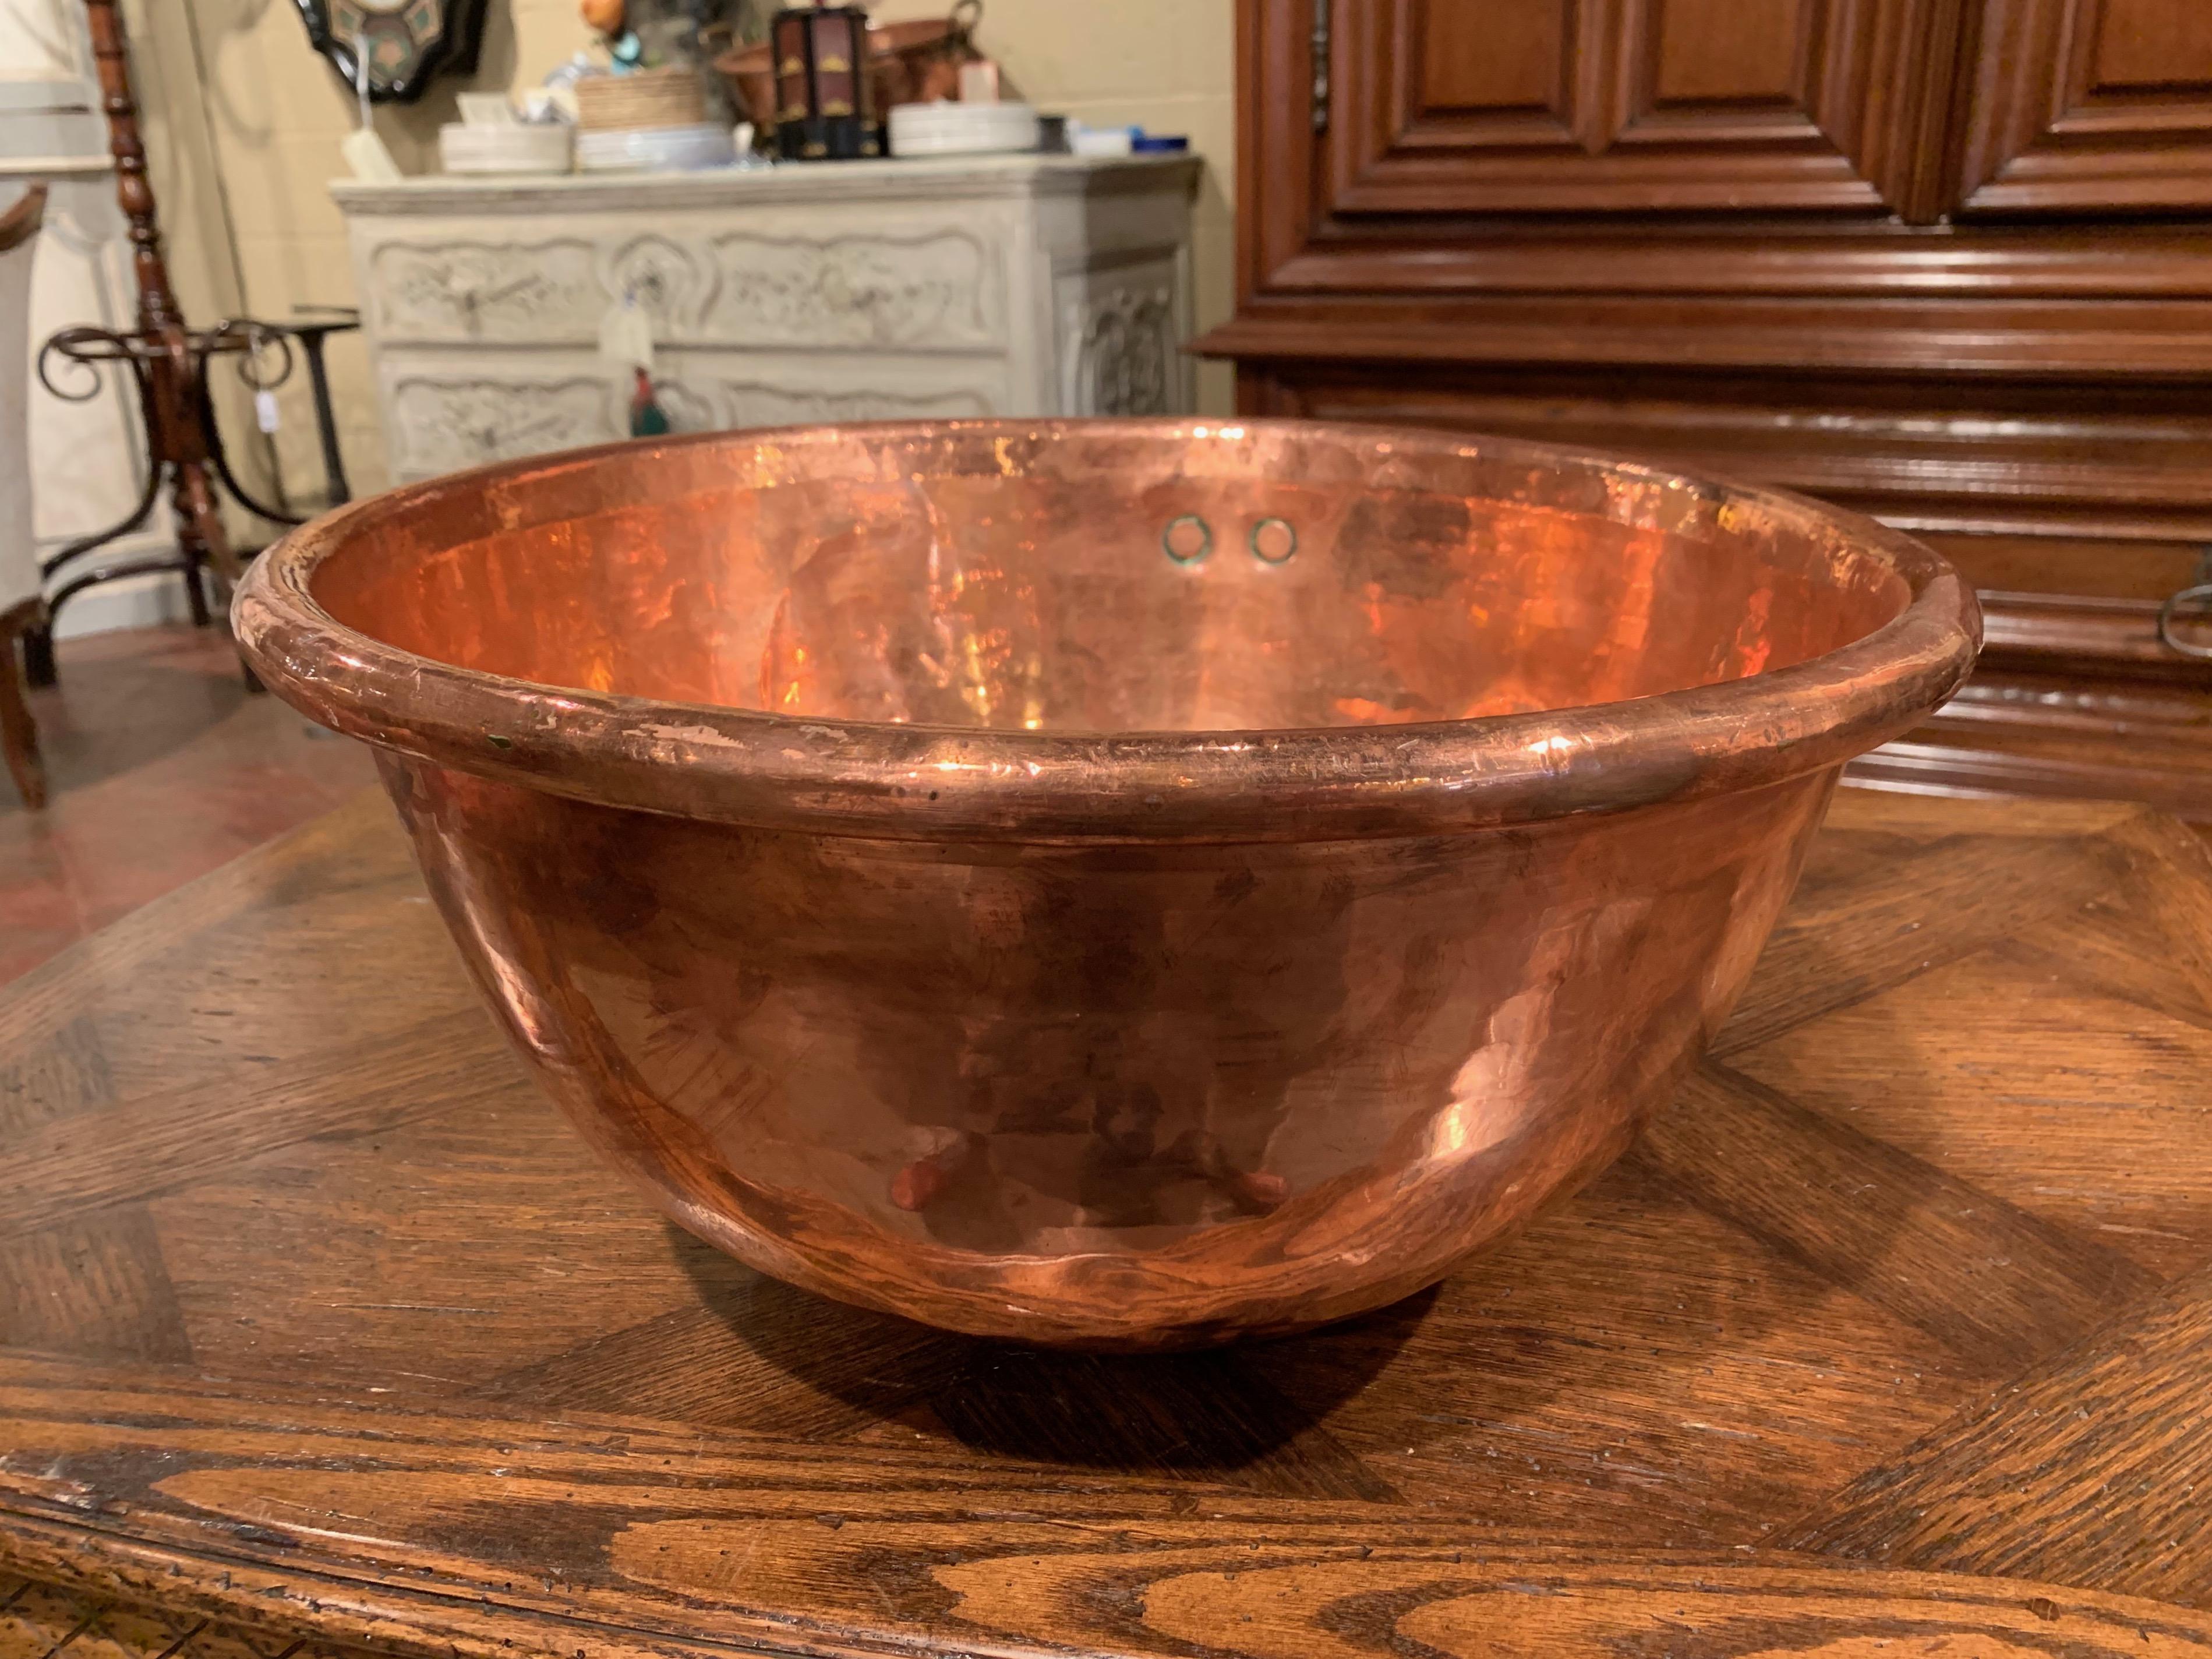 Polished 19th Century French Copper Jelly Bowl from Normandy For Sale